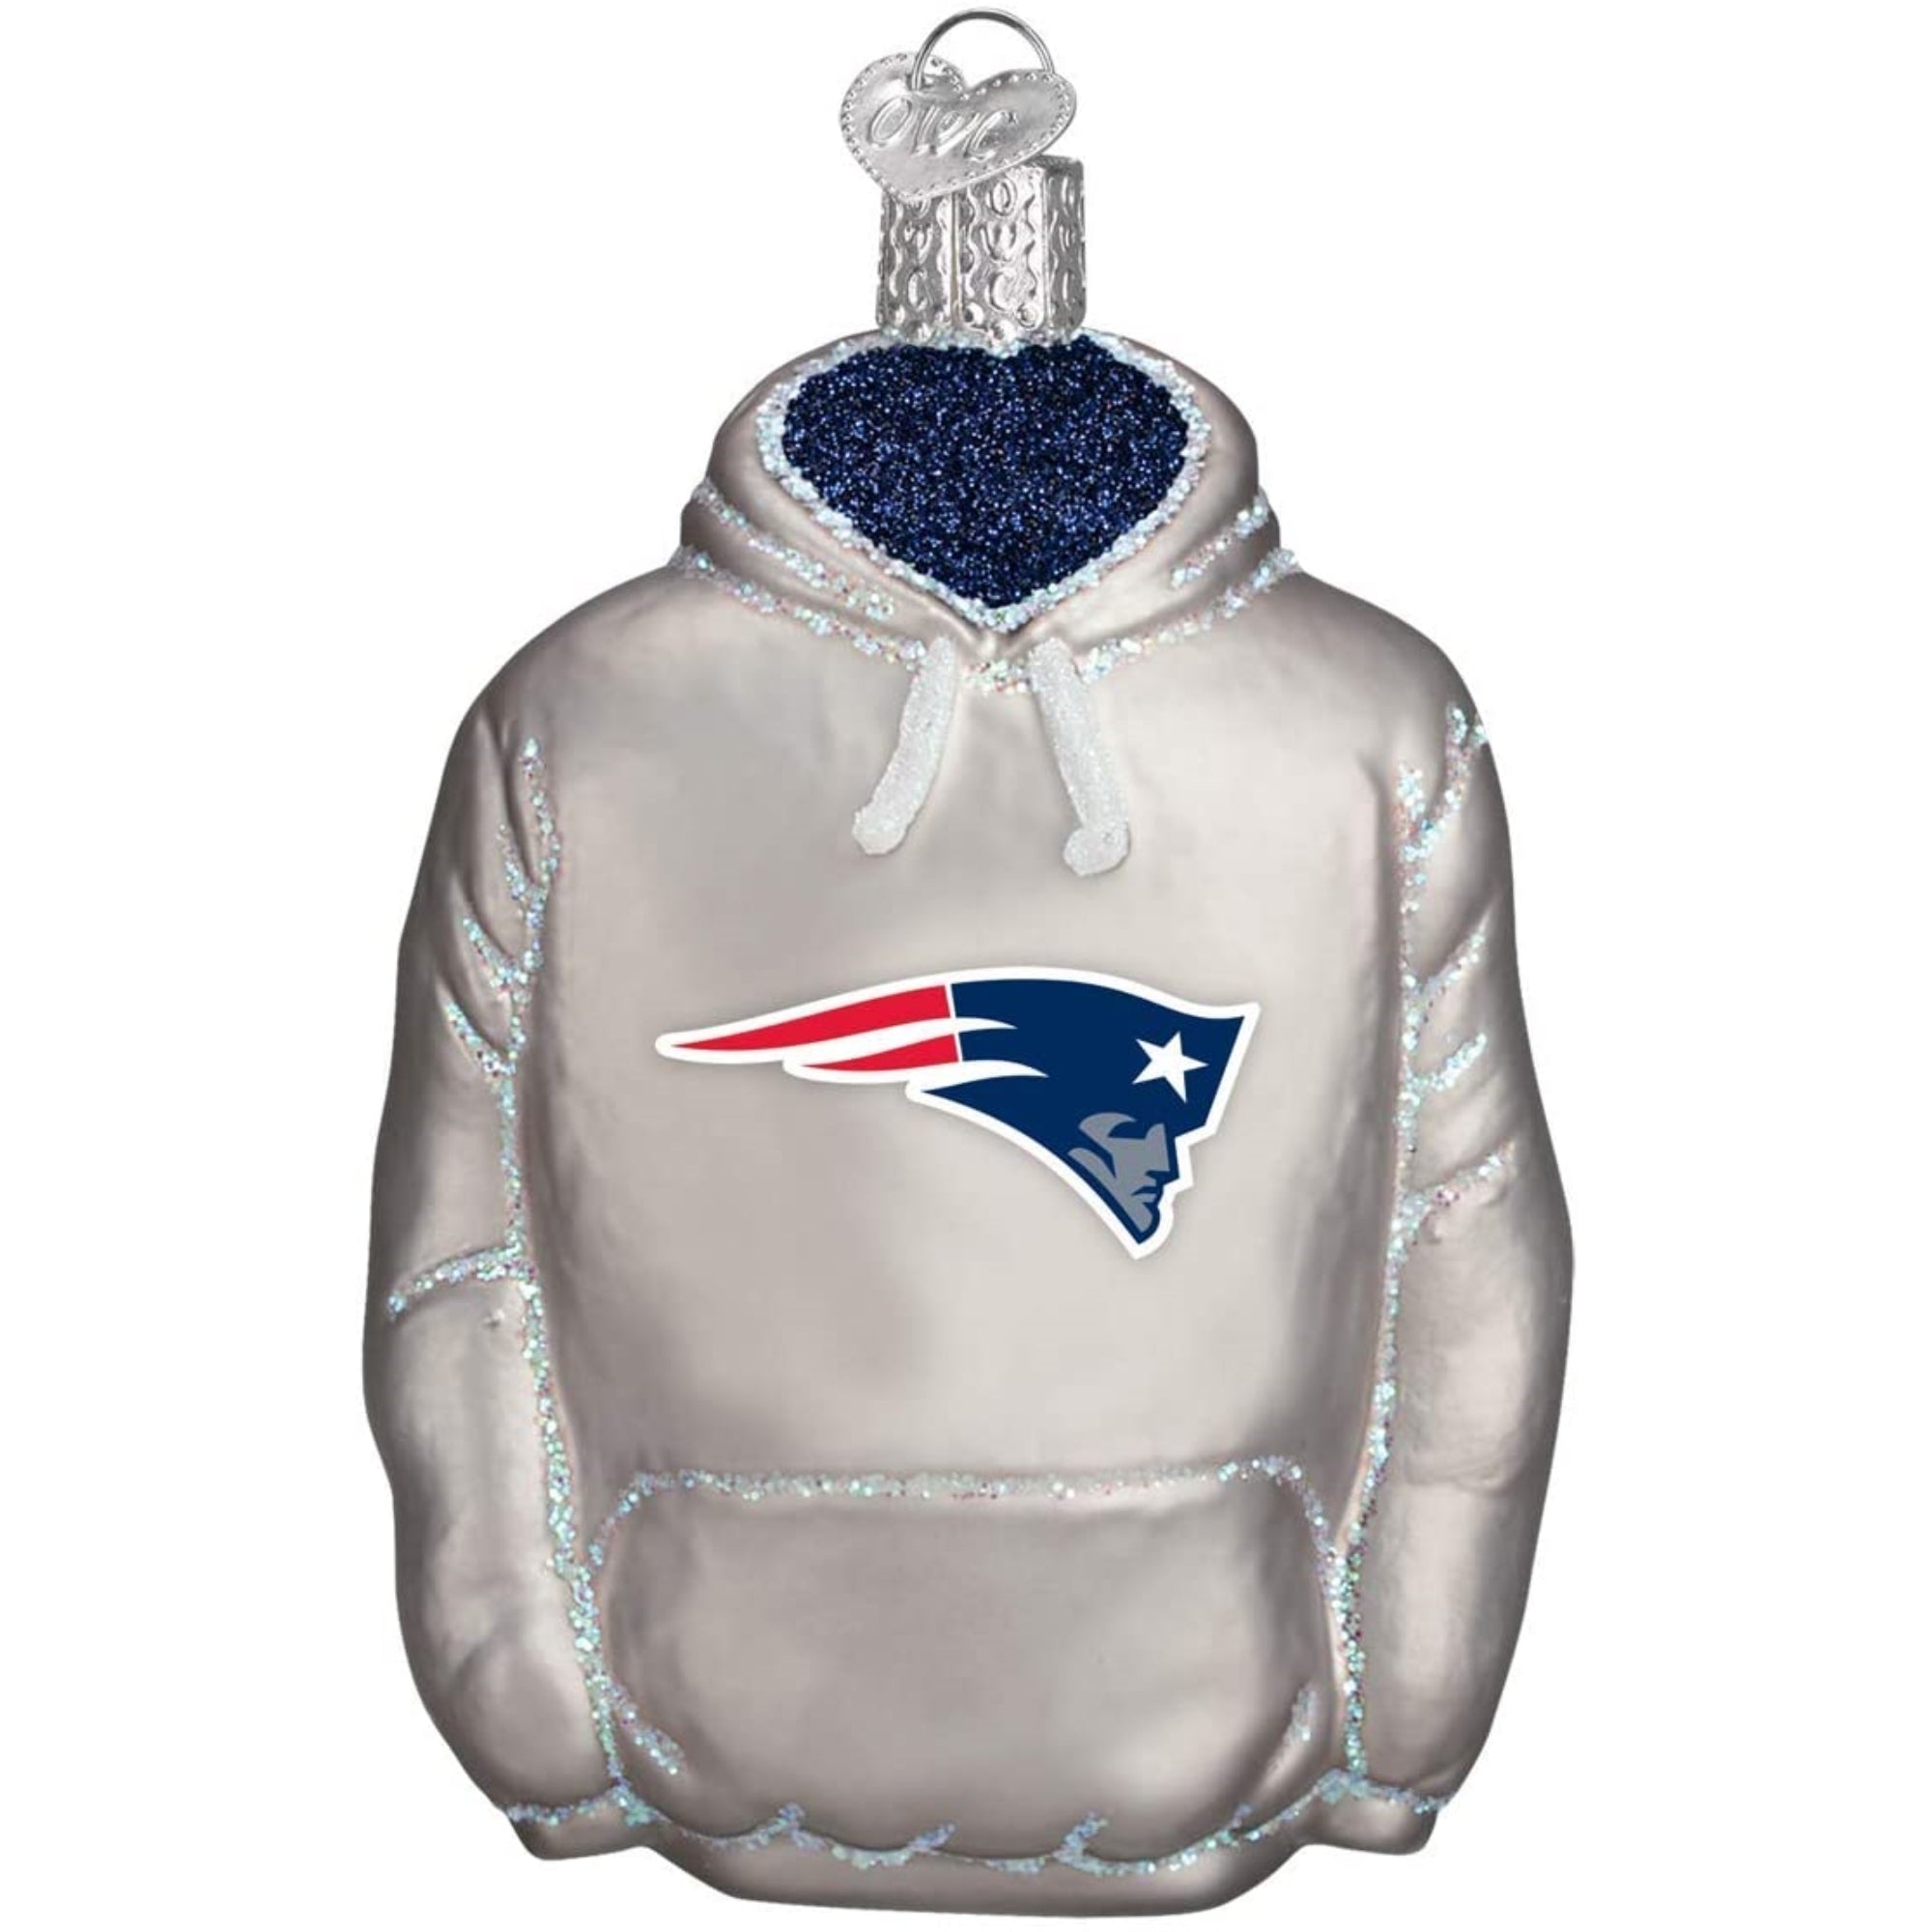 Old World Christmas New England Patriots Hoodie Ornament For Christmas Tree